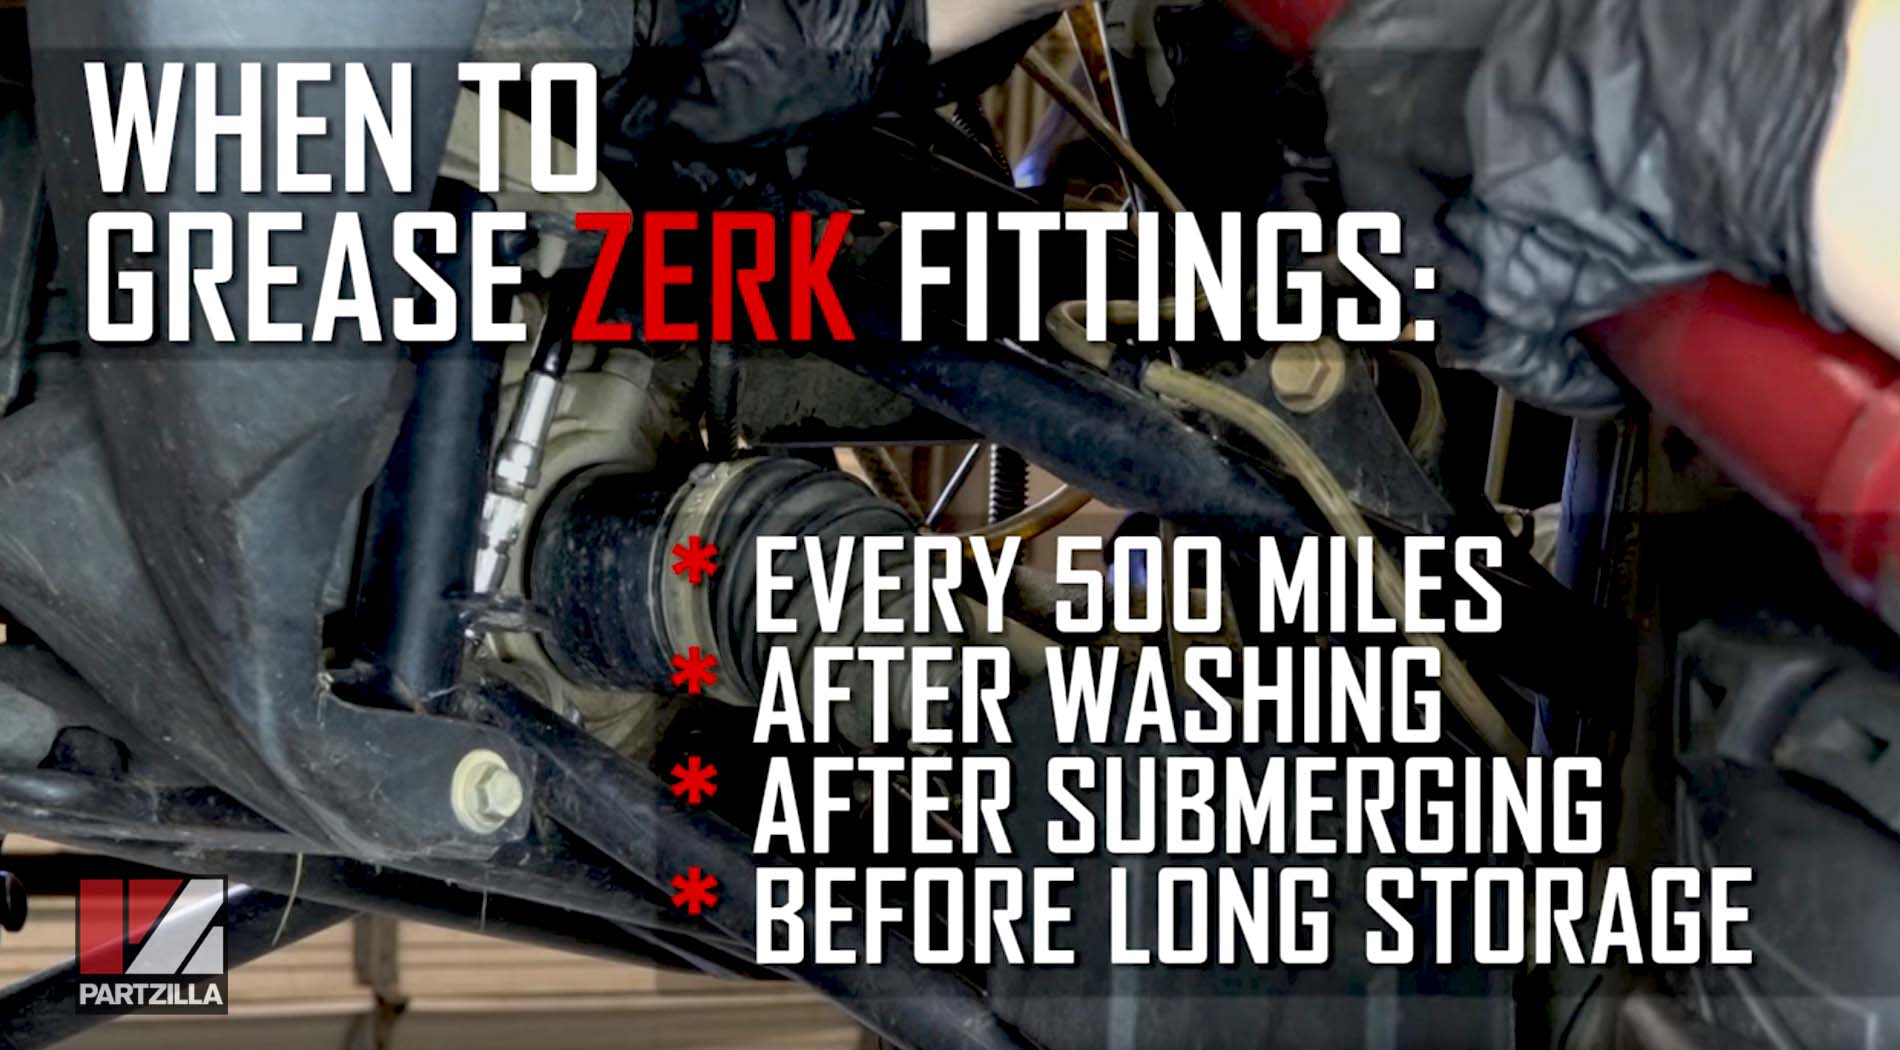 When to grease ATV zerk fittings